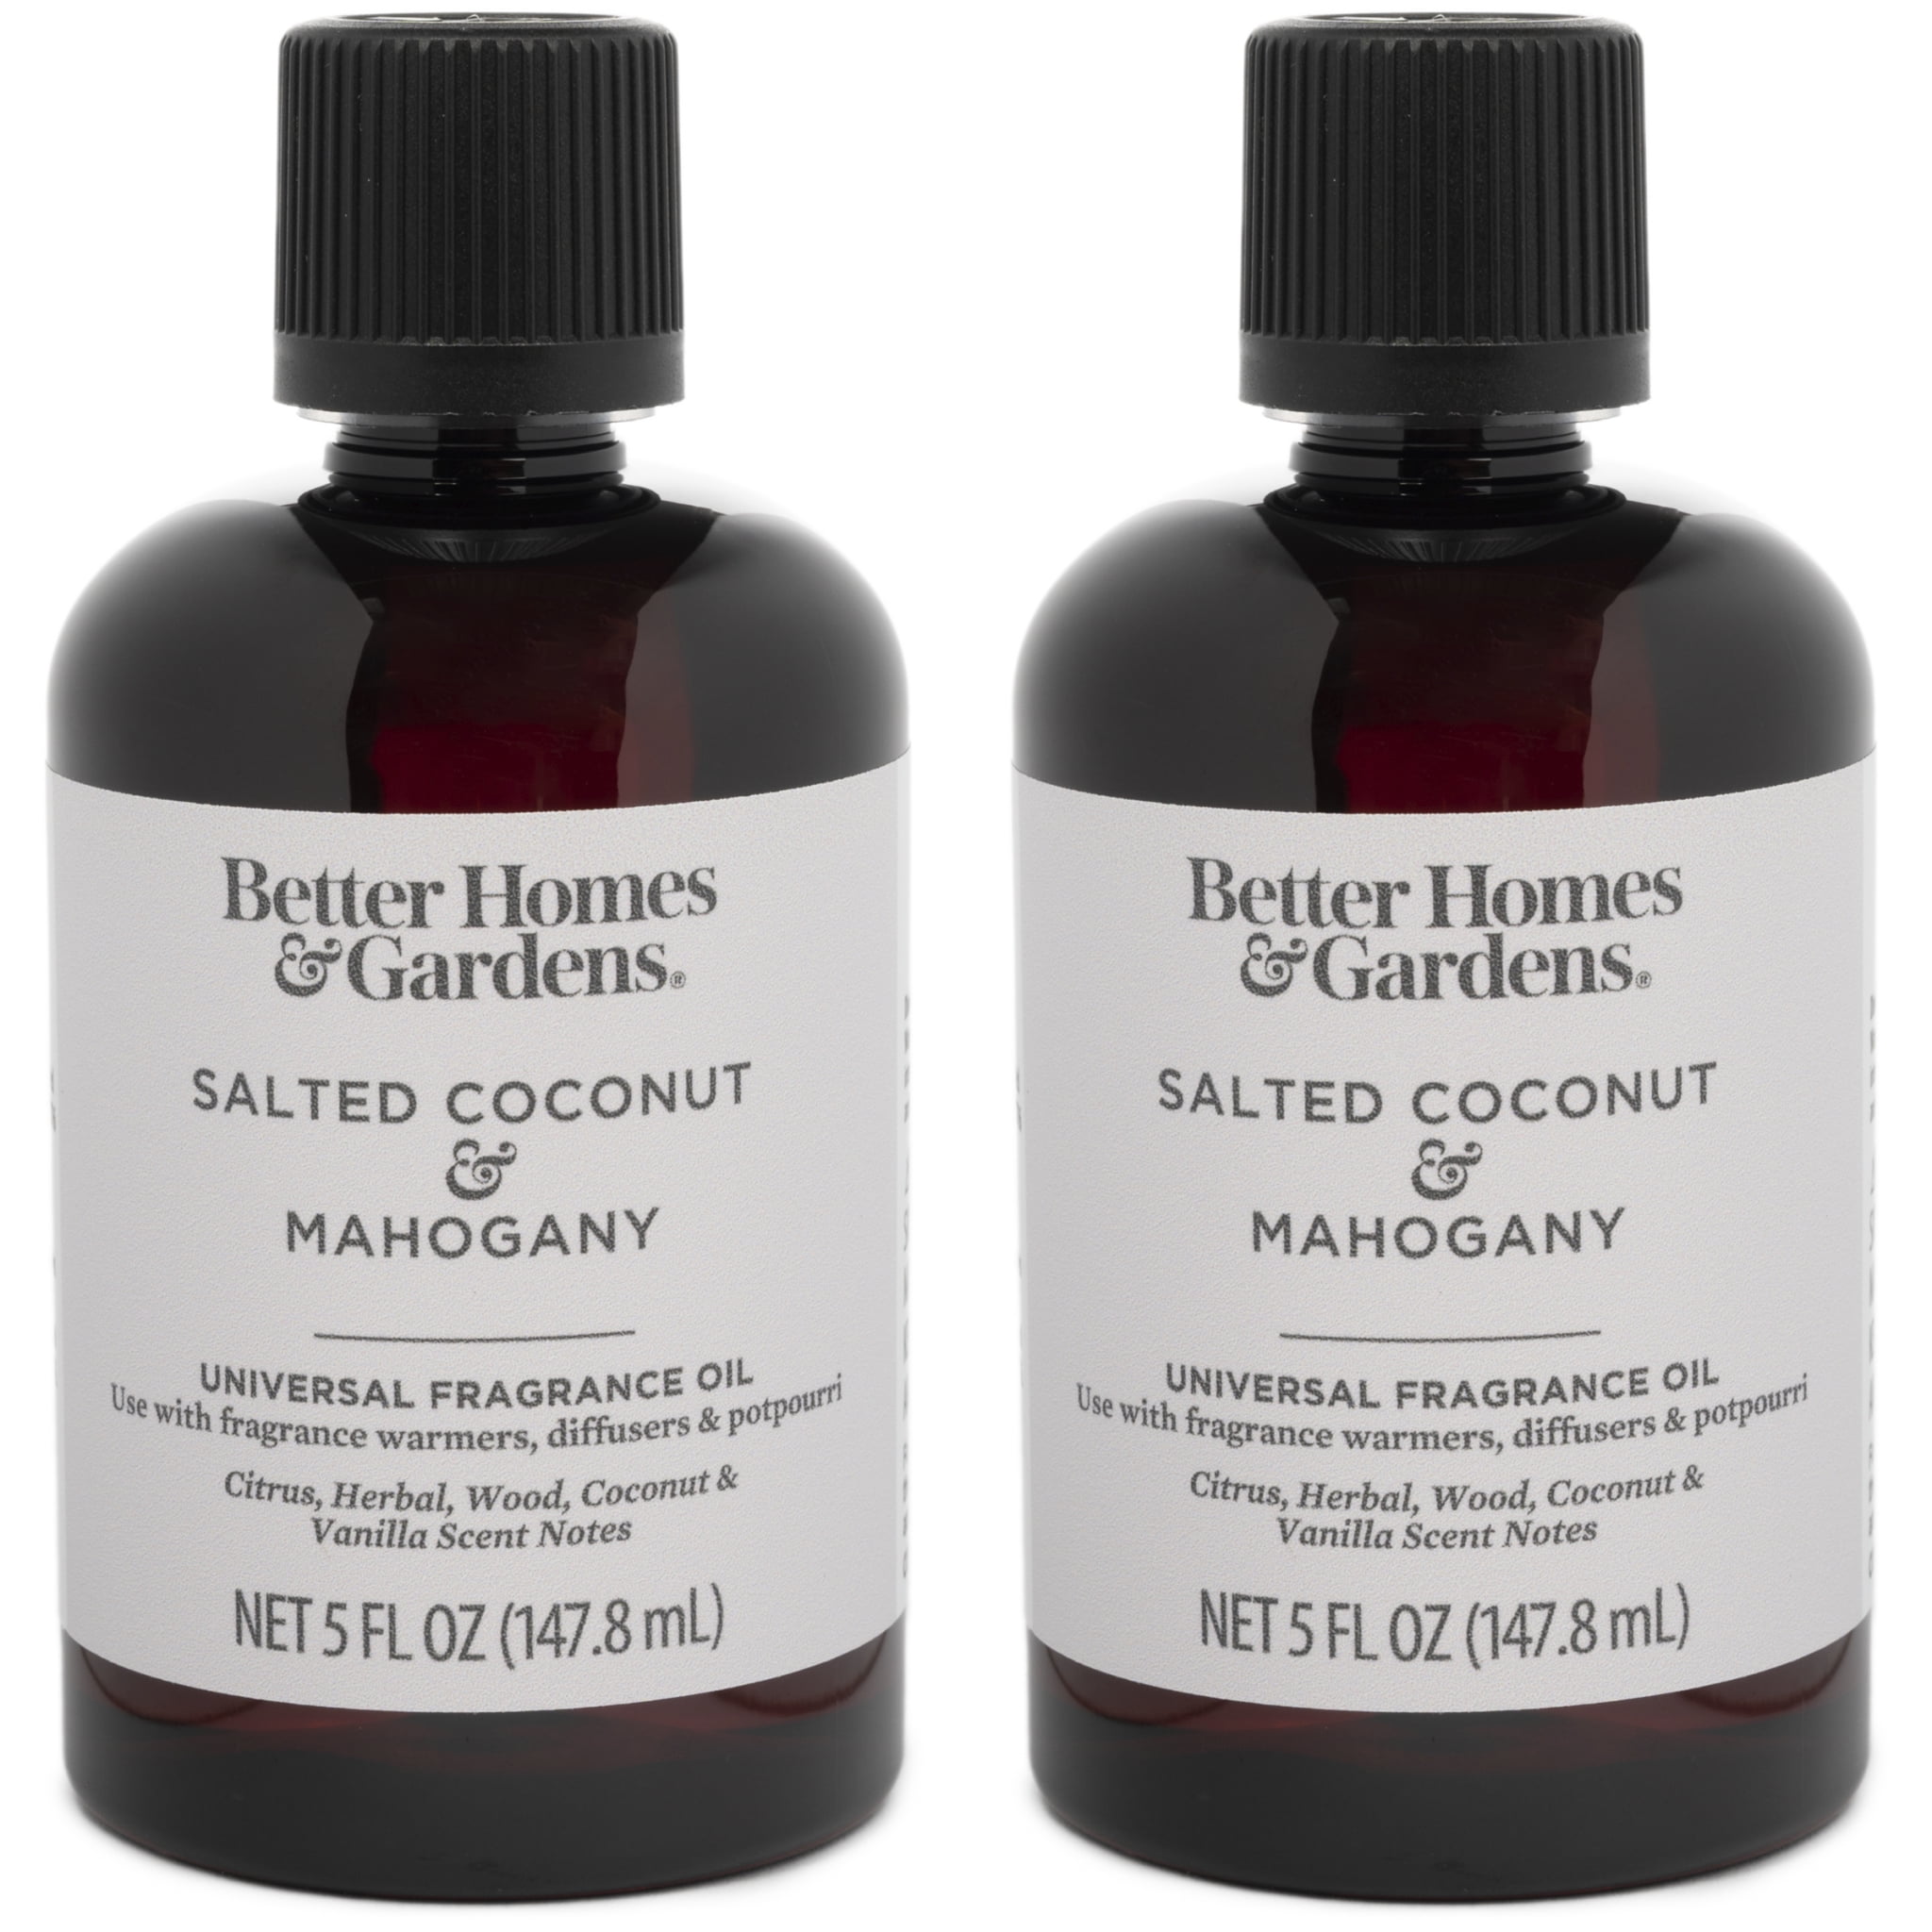 Better Homes & Gardens Universal Fragrance Oil, Soft Cashmere & Amber, 5 fl  oz, for use with Fragrance Oil Diffusers, Fragrance Warmers, Potpourri